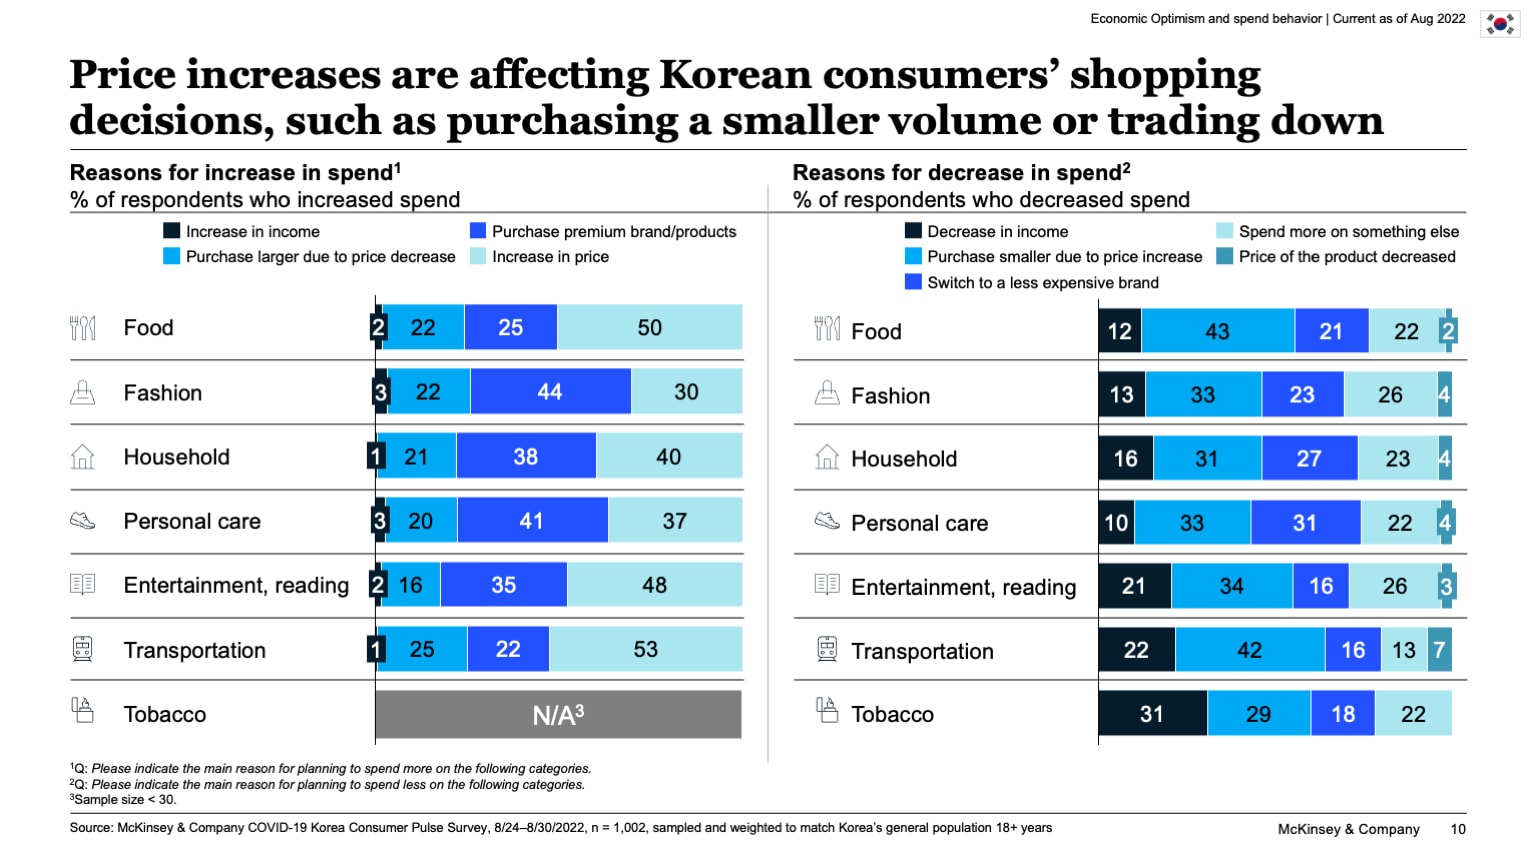 Price increases are affecting Korean consumers’ shopping decisions, such as purchasing a smaller volume or trading down